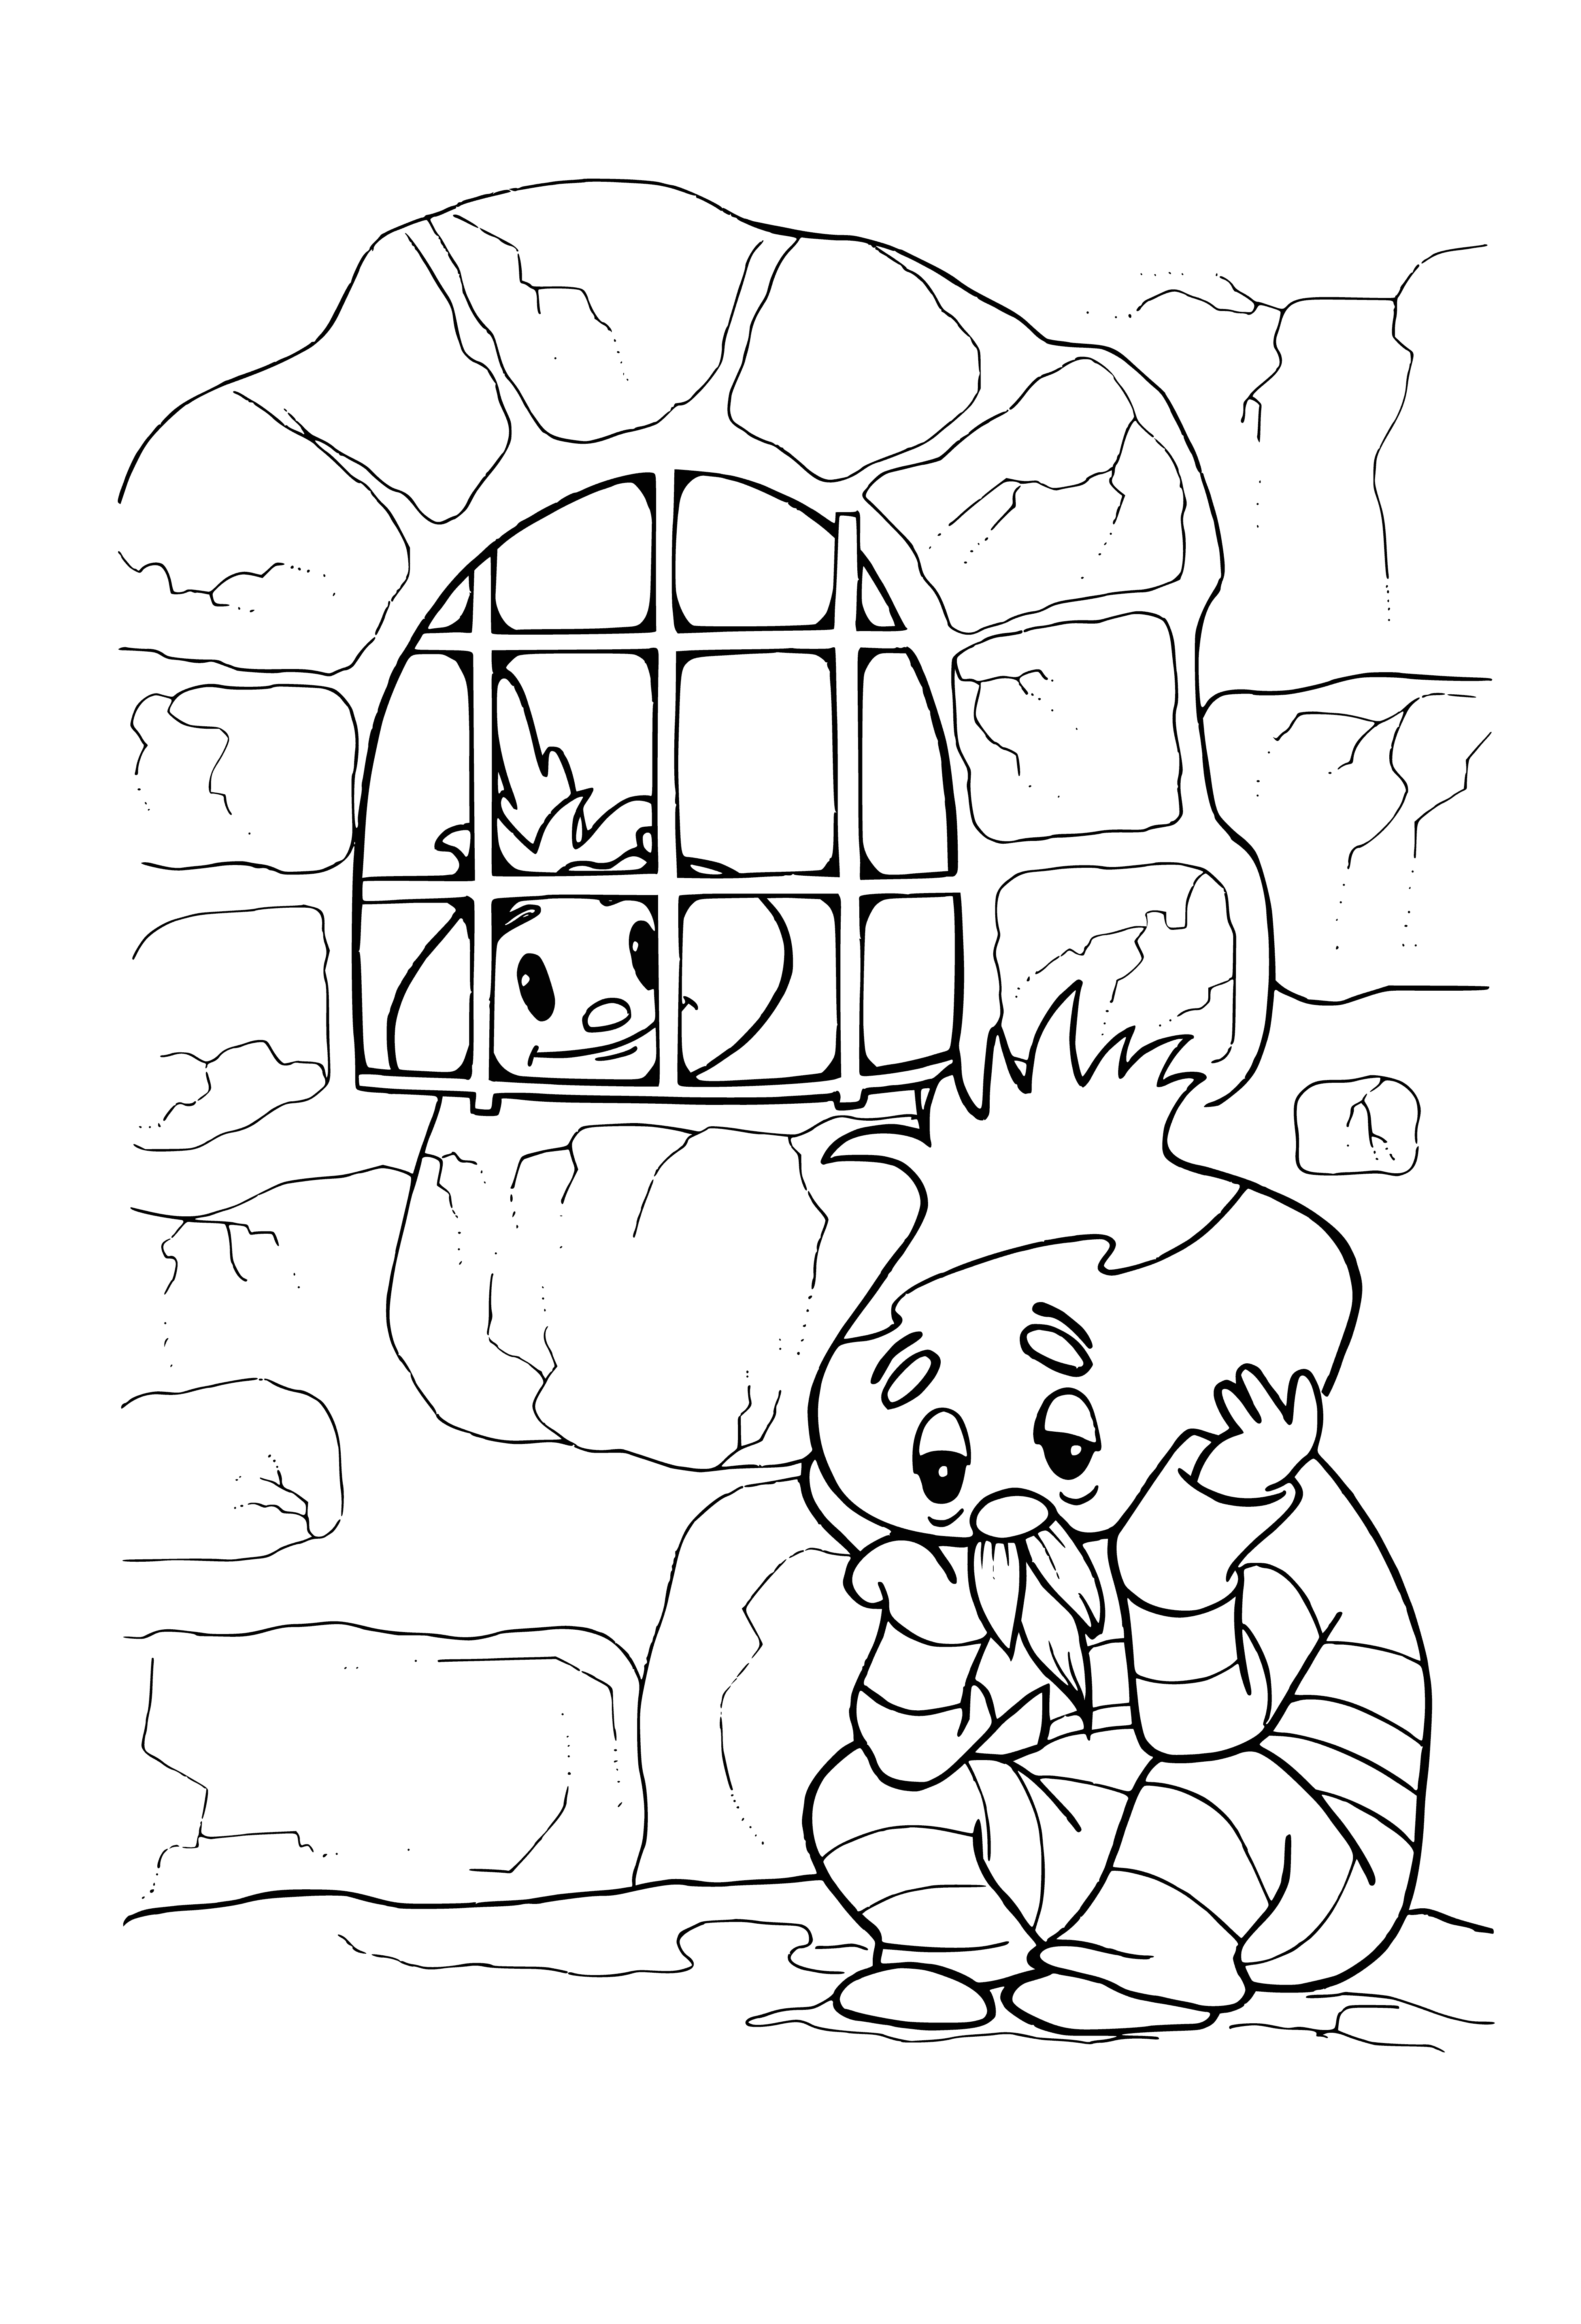 coloring page: Cipollino, a young boy w/ large head & eyes, sparse hair & large nose. Wearing striped shirt & trousers, he sits on a rock next to a tomato plant.